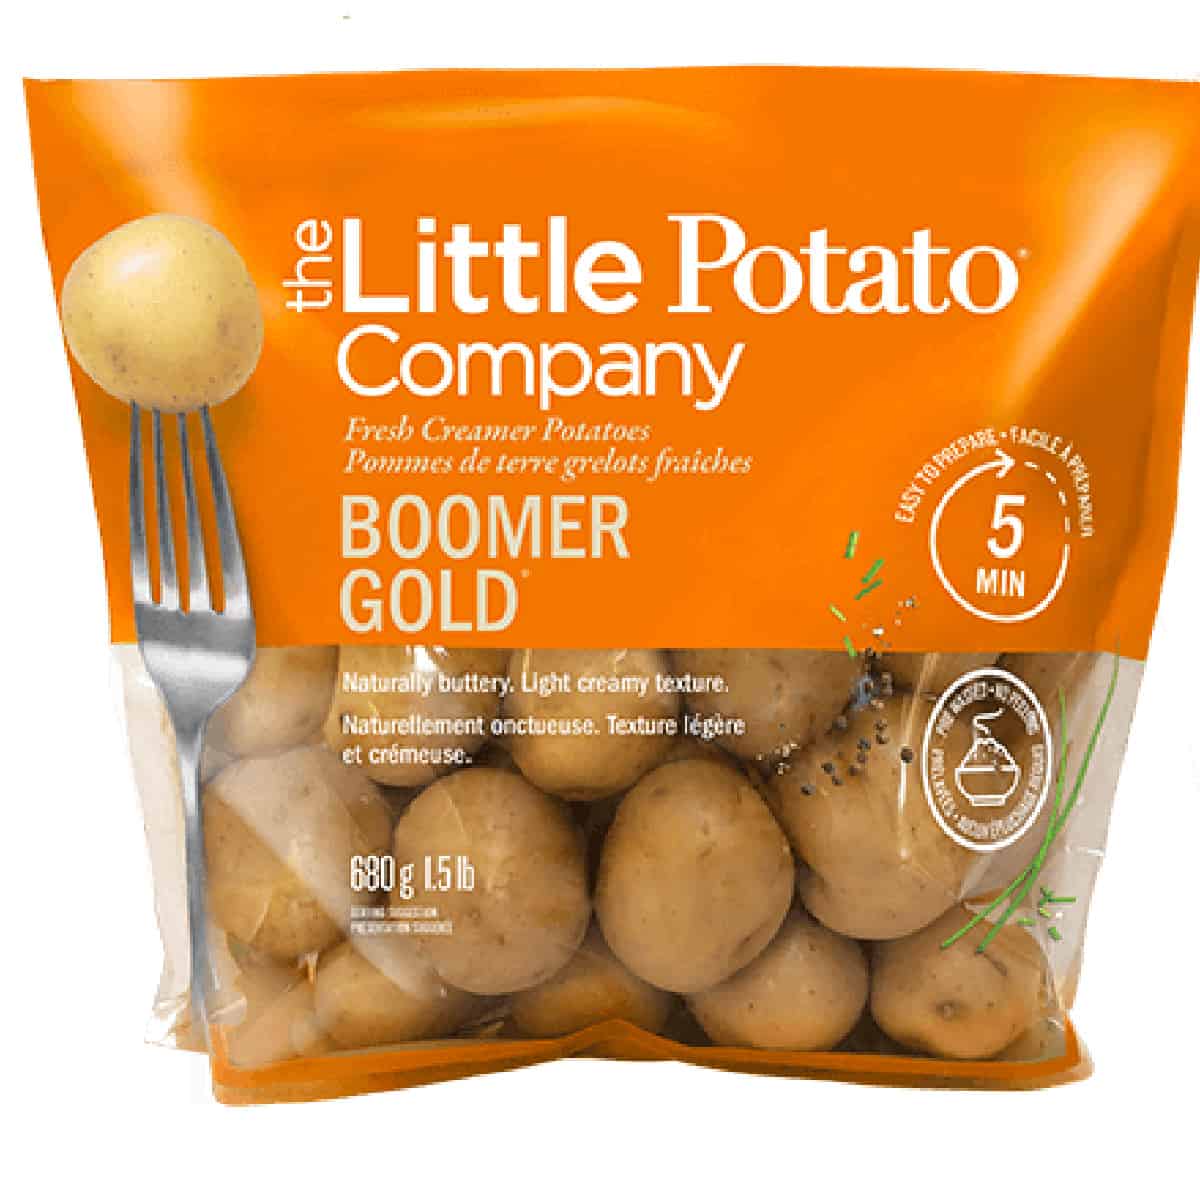 Bag of Boomer Gold from Little Potato Company